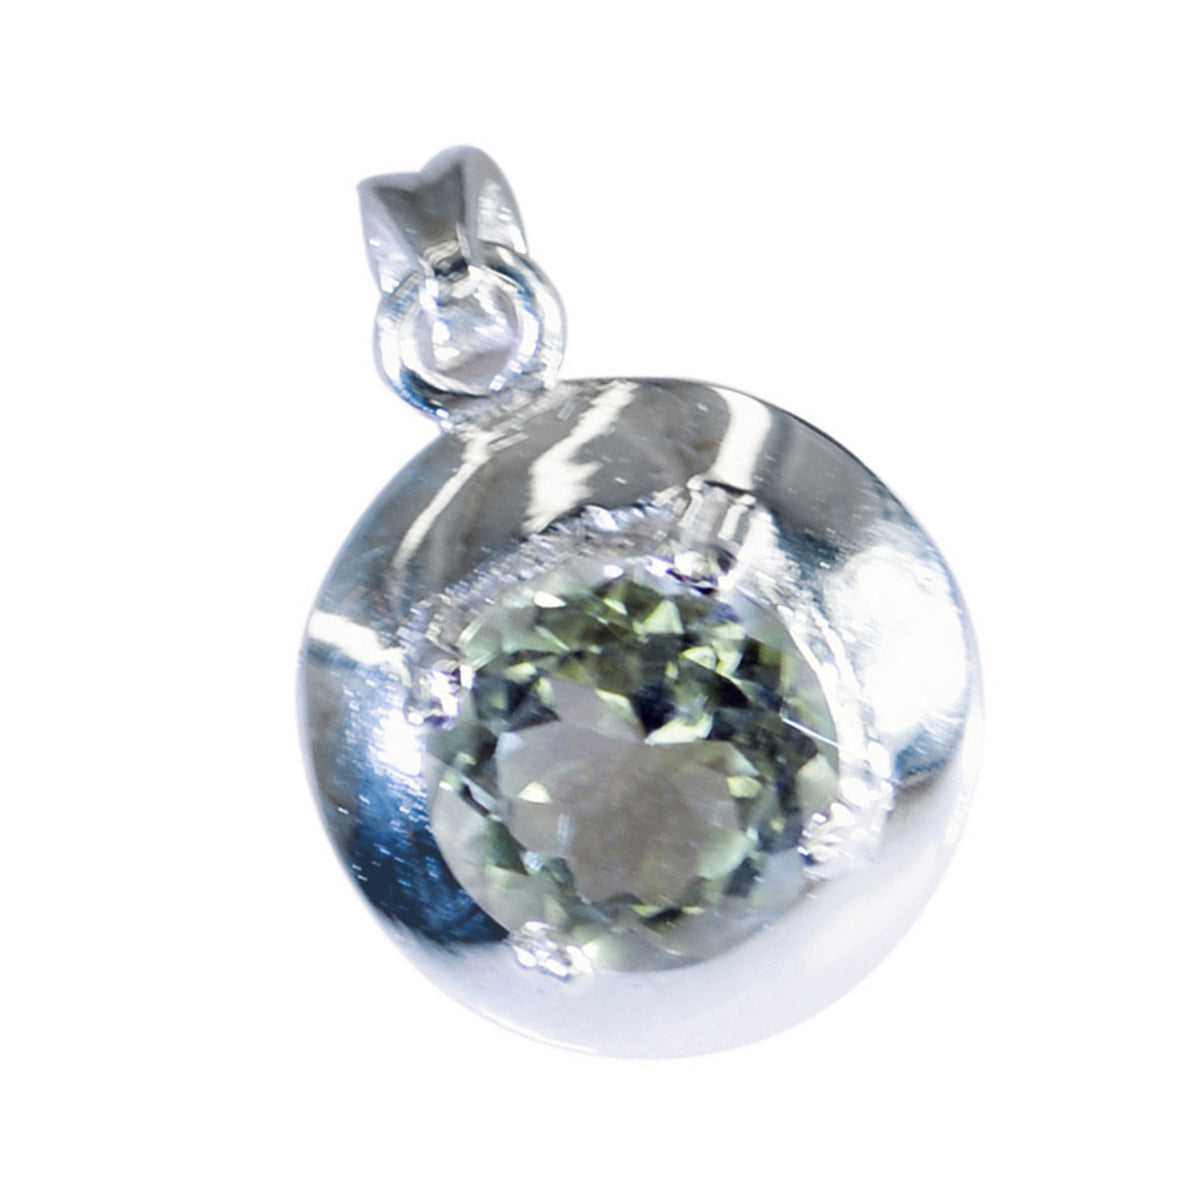 Riyo Real Gemstone Round Faceted Green Green Amethyst 960 Sterling Silver Pendant Gift For Girlfriend